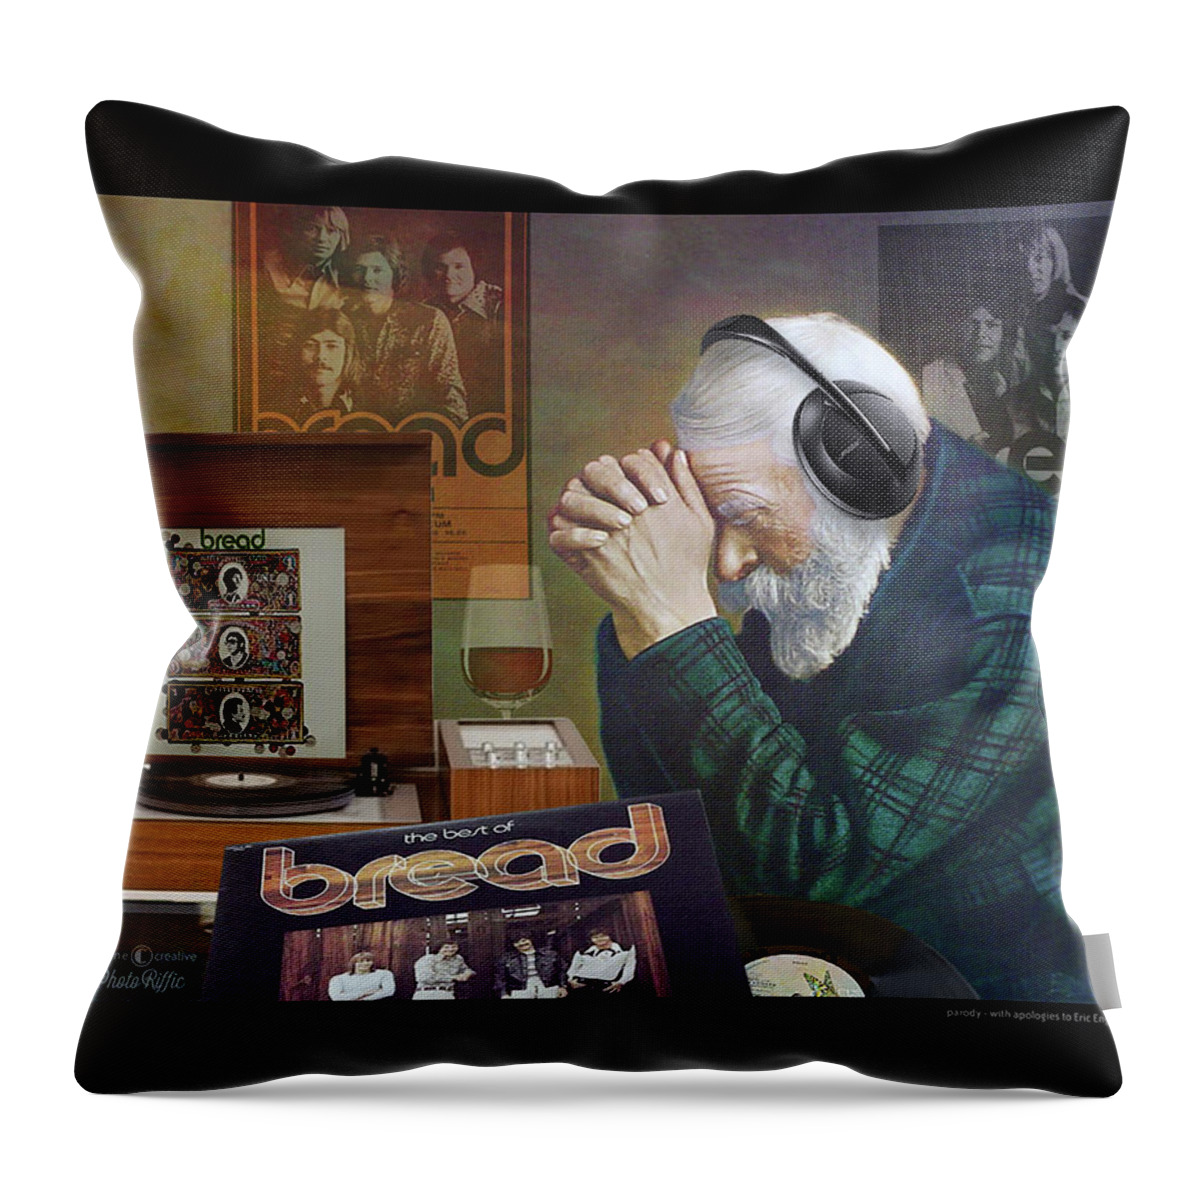 Grace Throw Pillow featuring the digital art Grace Bread Parody by Tim Nyberg